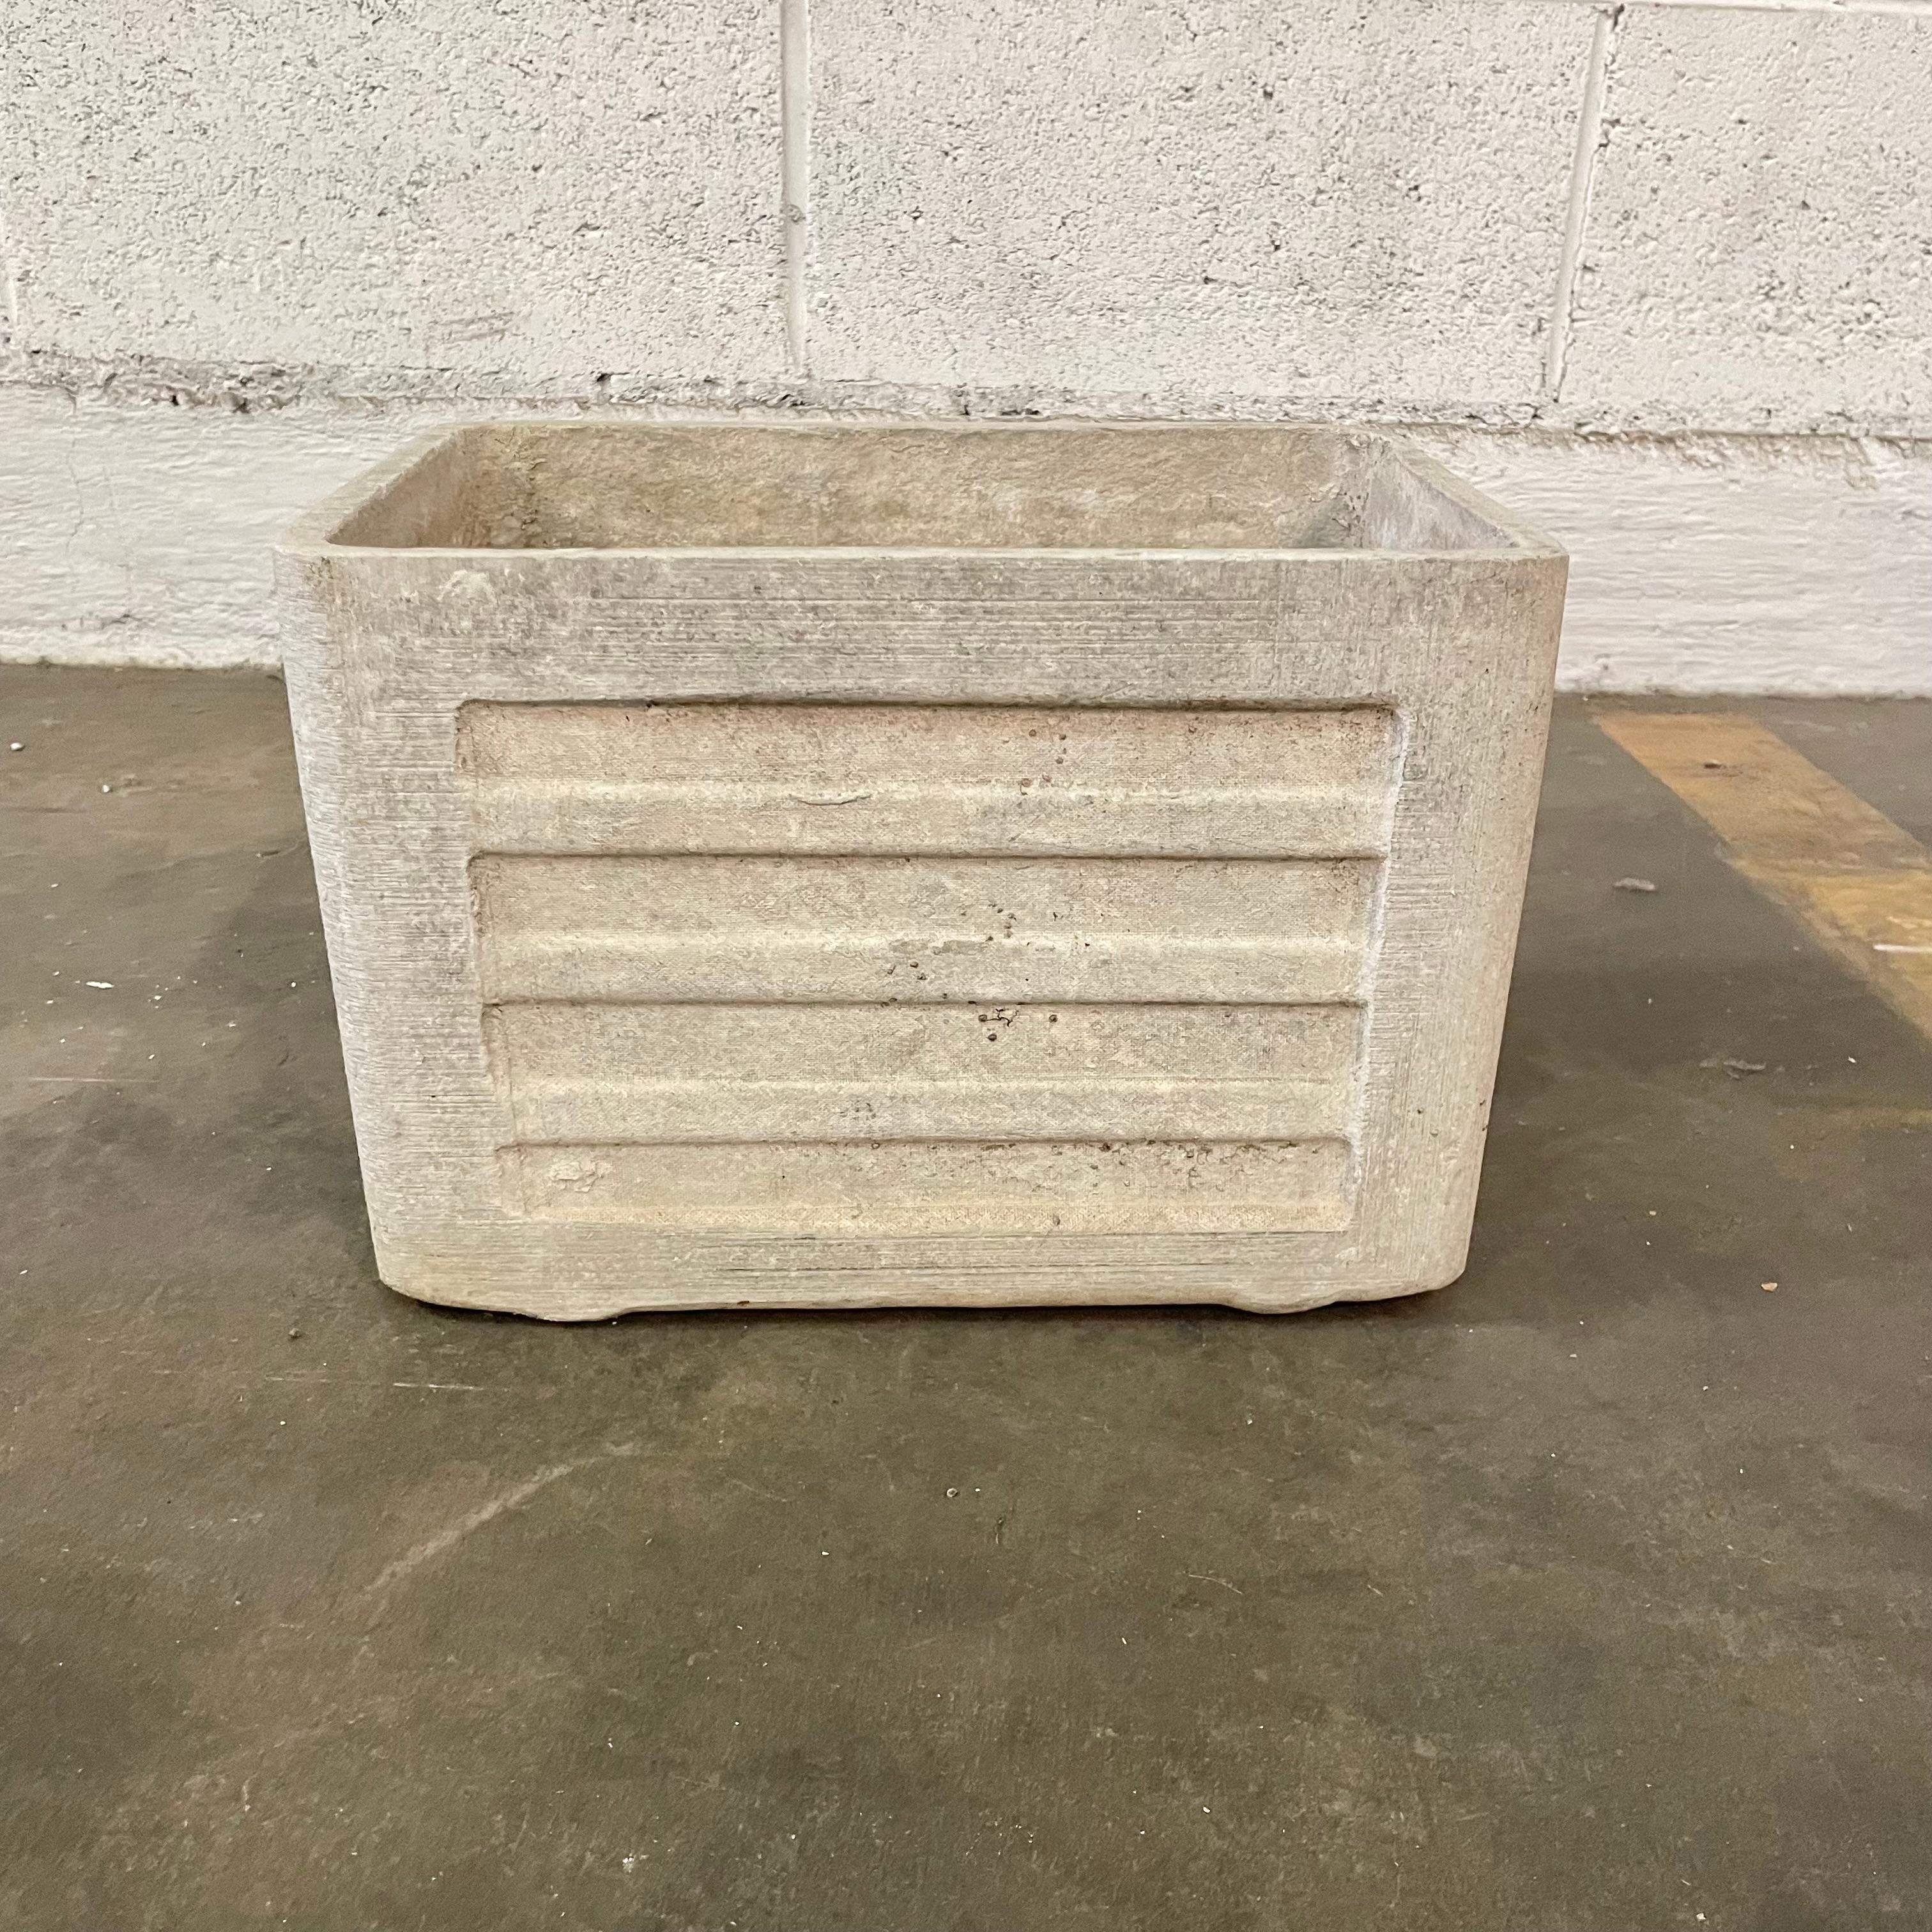 Petite ridged planter by Willy Guhl. Concrete planter in the shape of a rectangle with an upper rim and ridged sides. Great scale. Very good vintage condition. Only one available.

   